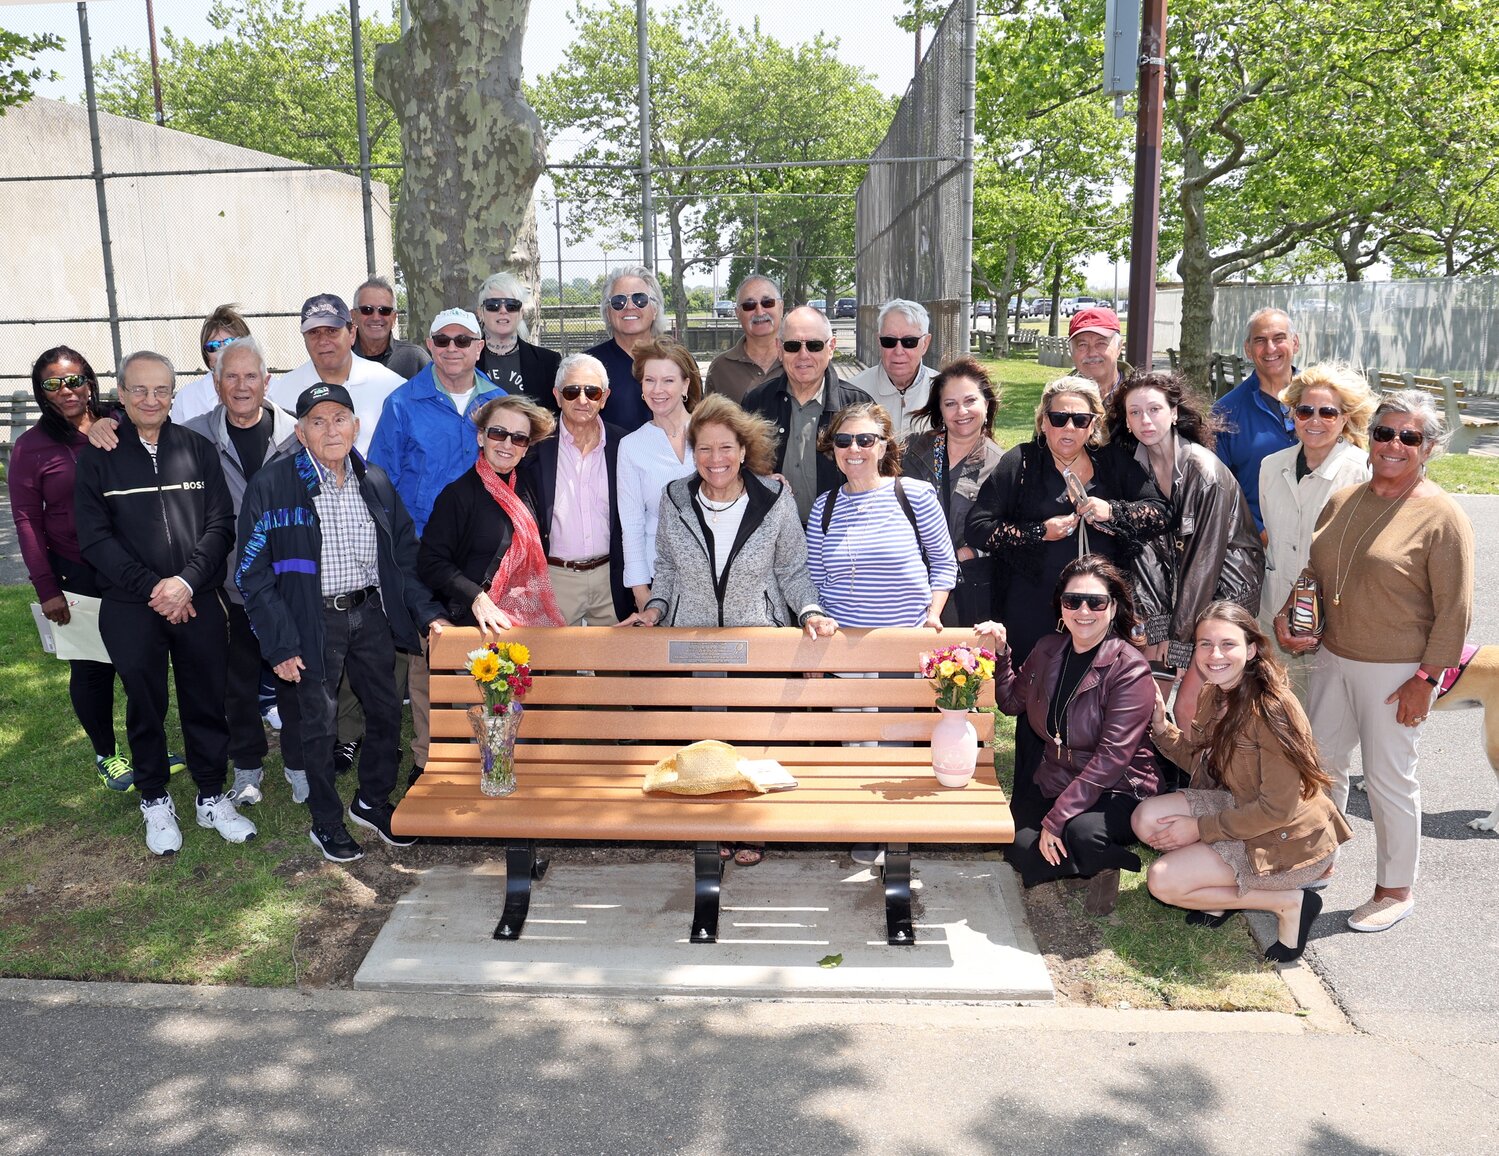 Friends of Jay Fagin, including Hempstead Town Councilwoman Laura Ryder, middle in white, gather at a bench dedicated to Fagin in Oceanside Park. The cowboy hat he wore everywhere was its first occupant.